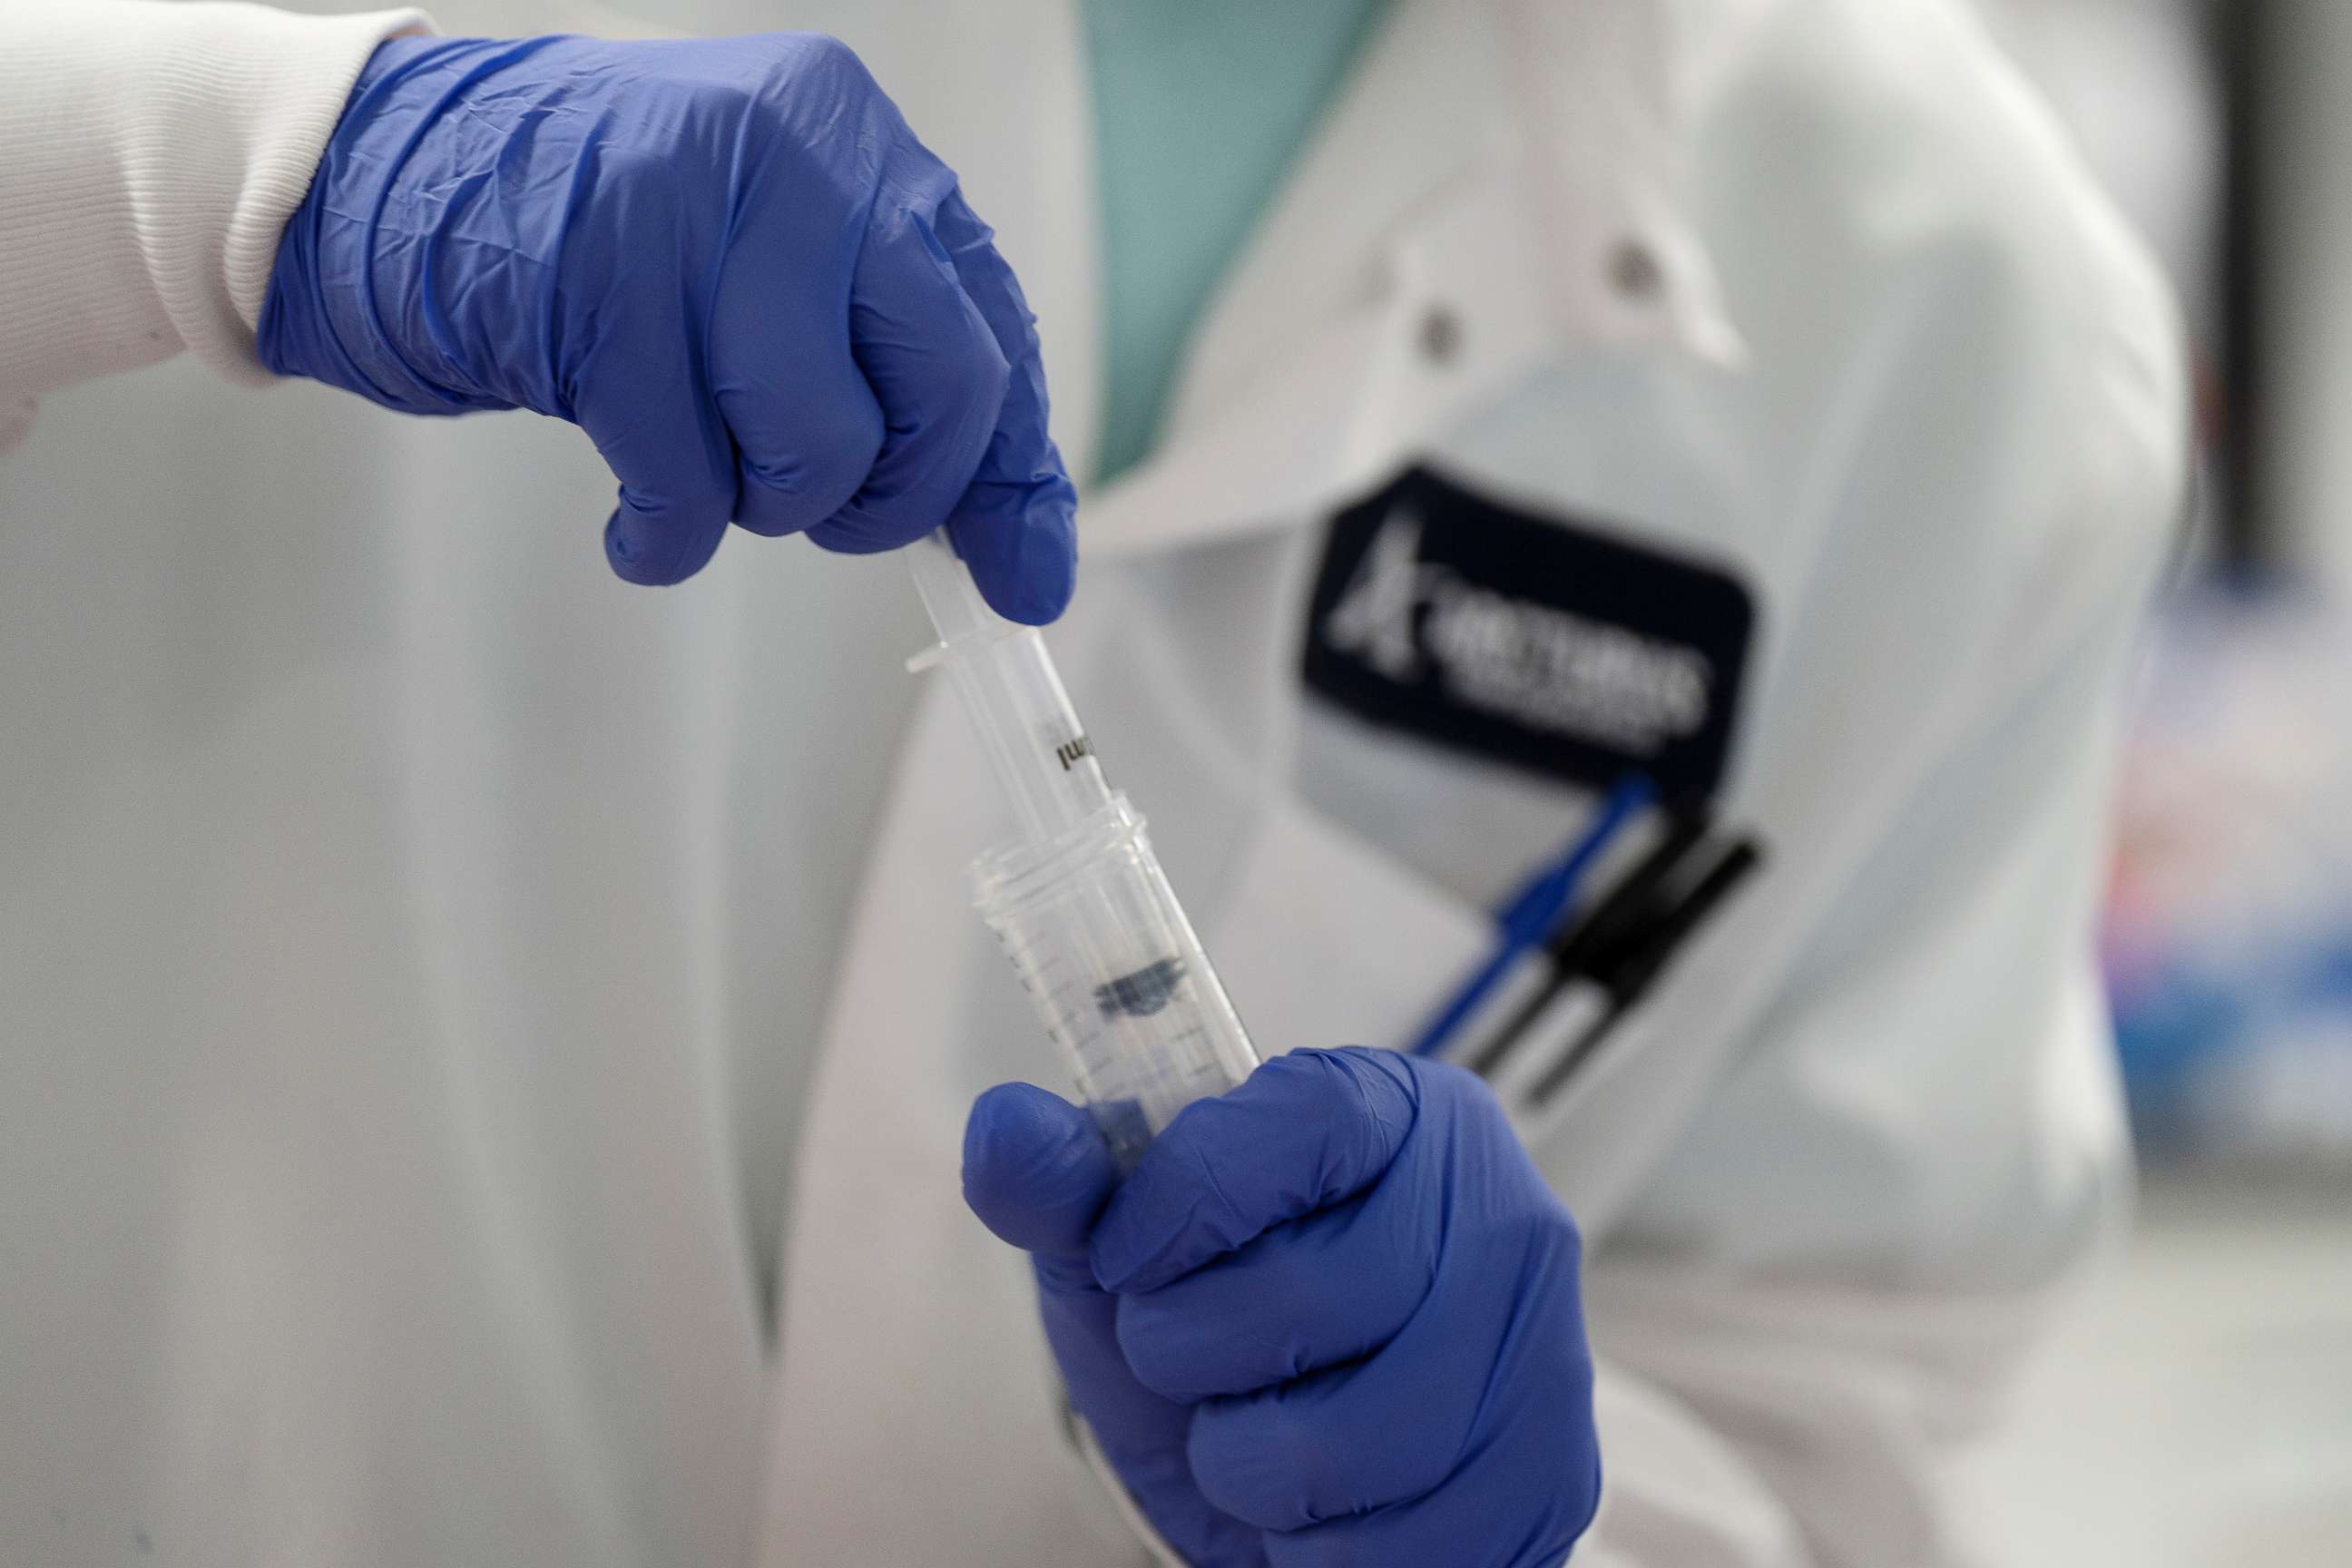 FILE PHOTO: A scientist conducts research on a vaccine for the novel coronavirus (COVID-19) at the laboratories of RNA medicines company Arcturus Therapeutics in San Diego, California, U.S., March 17, 2020.